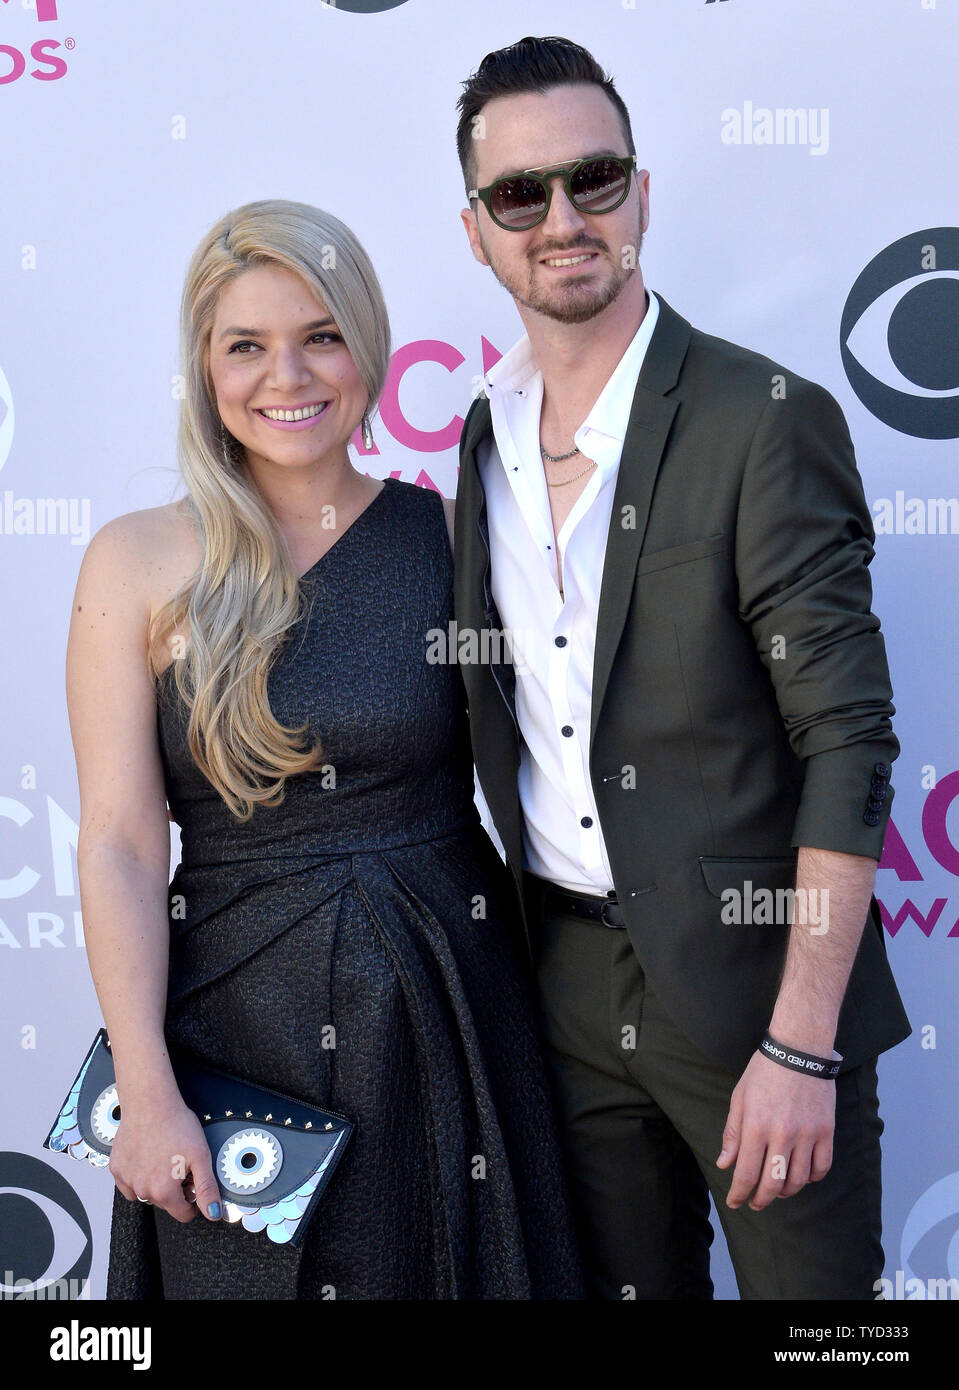 Sharona Nomder Kaikov (L) and songwriter Nitzan 'K-KOV' Kaikov attend the 52nd annual Academy of Country Music Awards held at T-Mobile Arena in Las Vegas, Nevada on April 2, 2017. The show will be telecast live on CBS.   Photo by Jim Ruymen/UPI Stock Photo